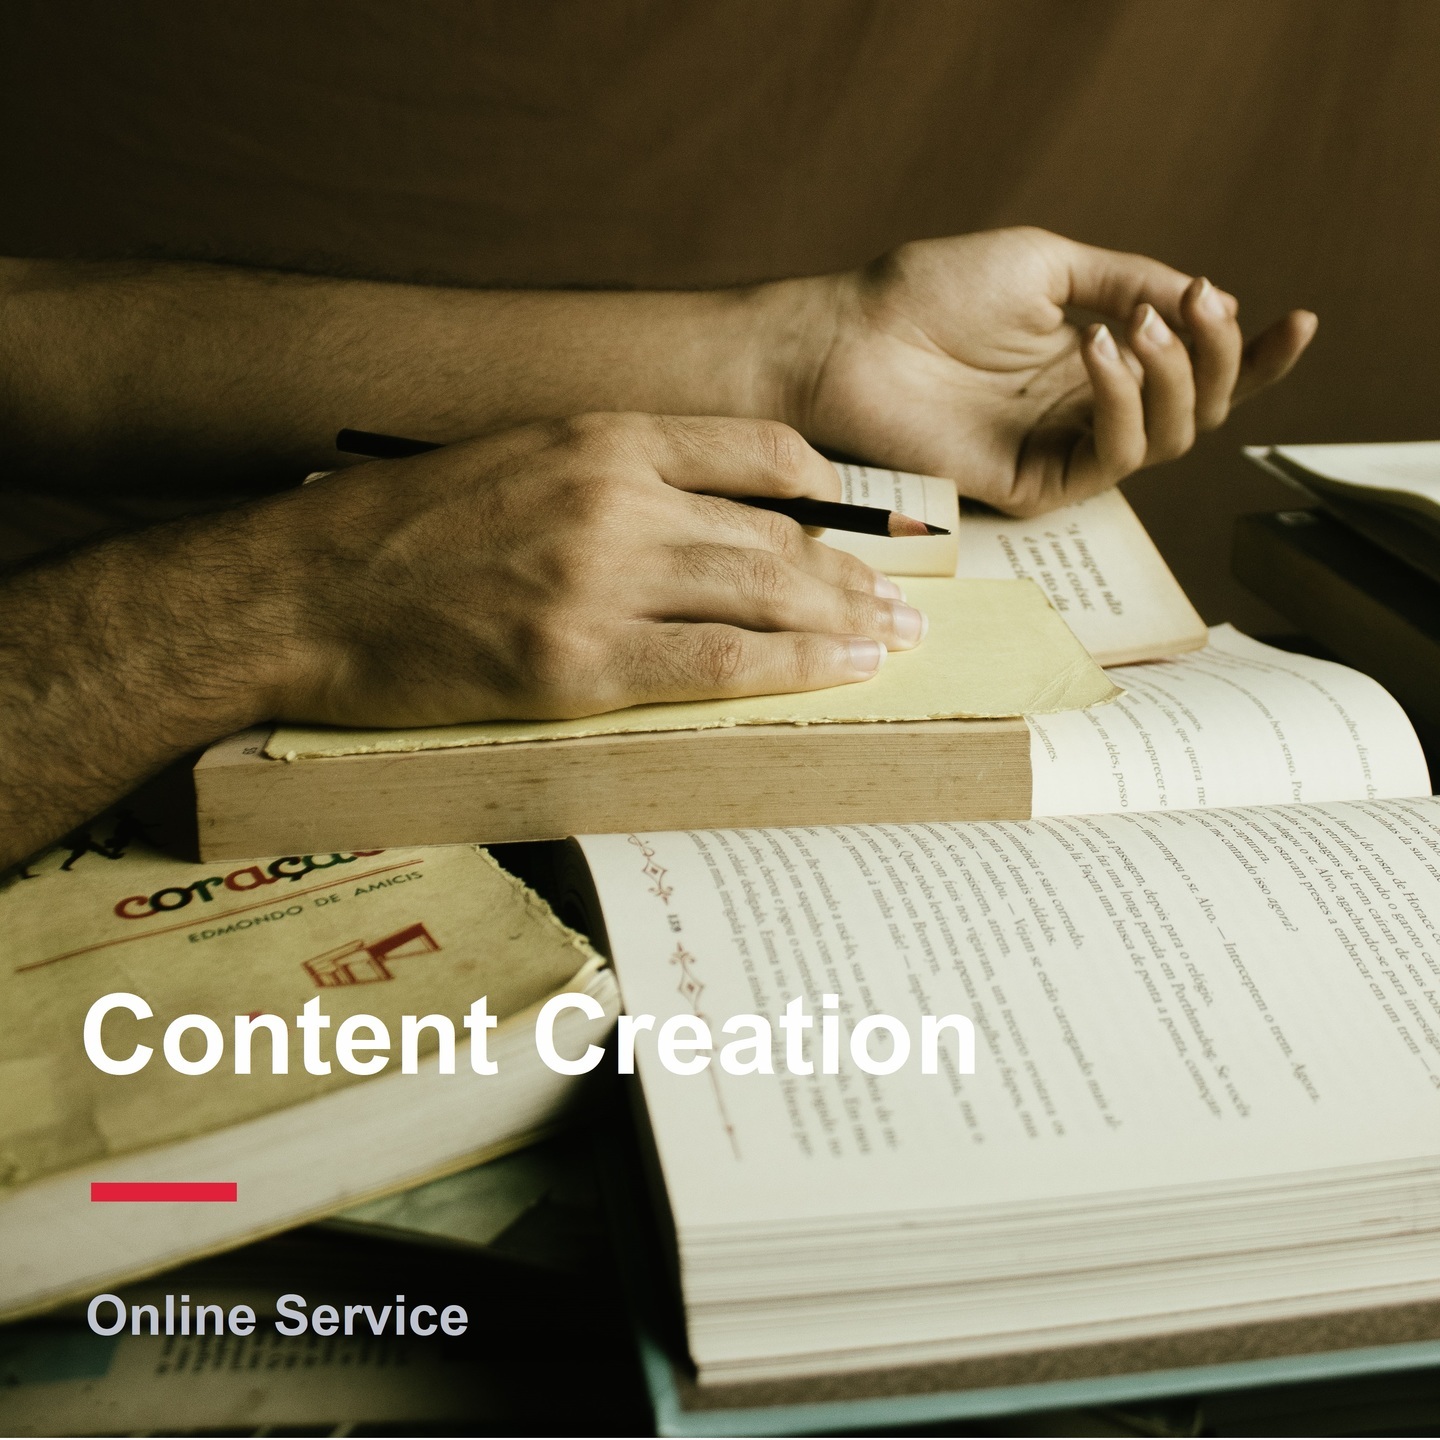 Content Creation 501-1250 words, up to 6 pages